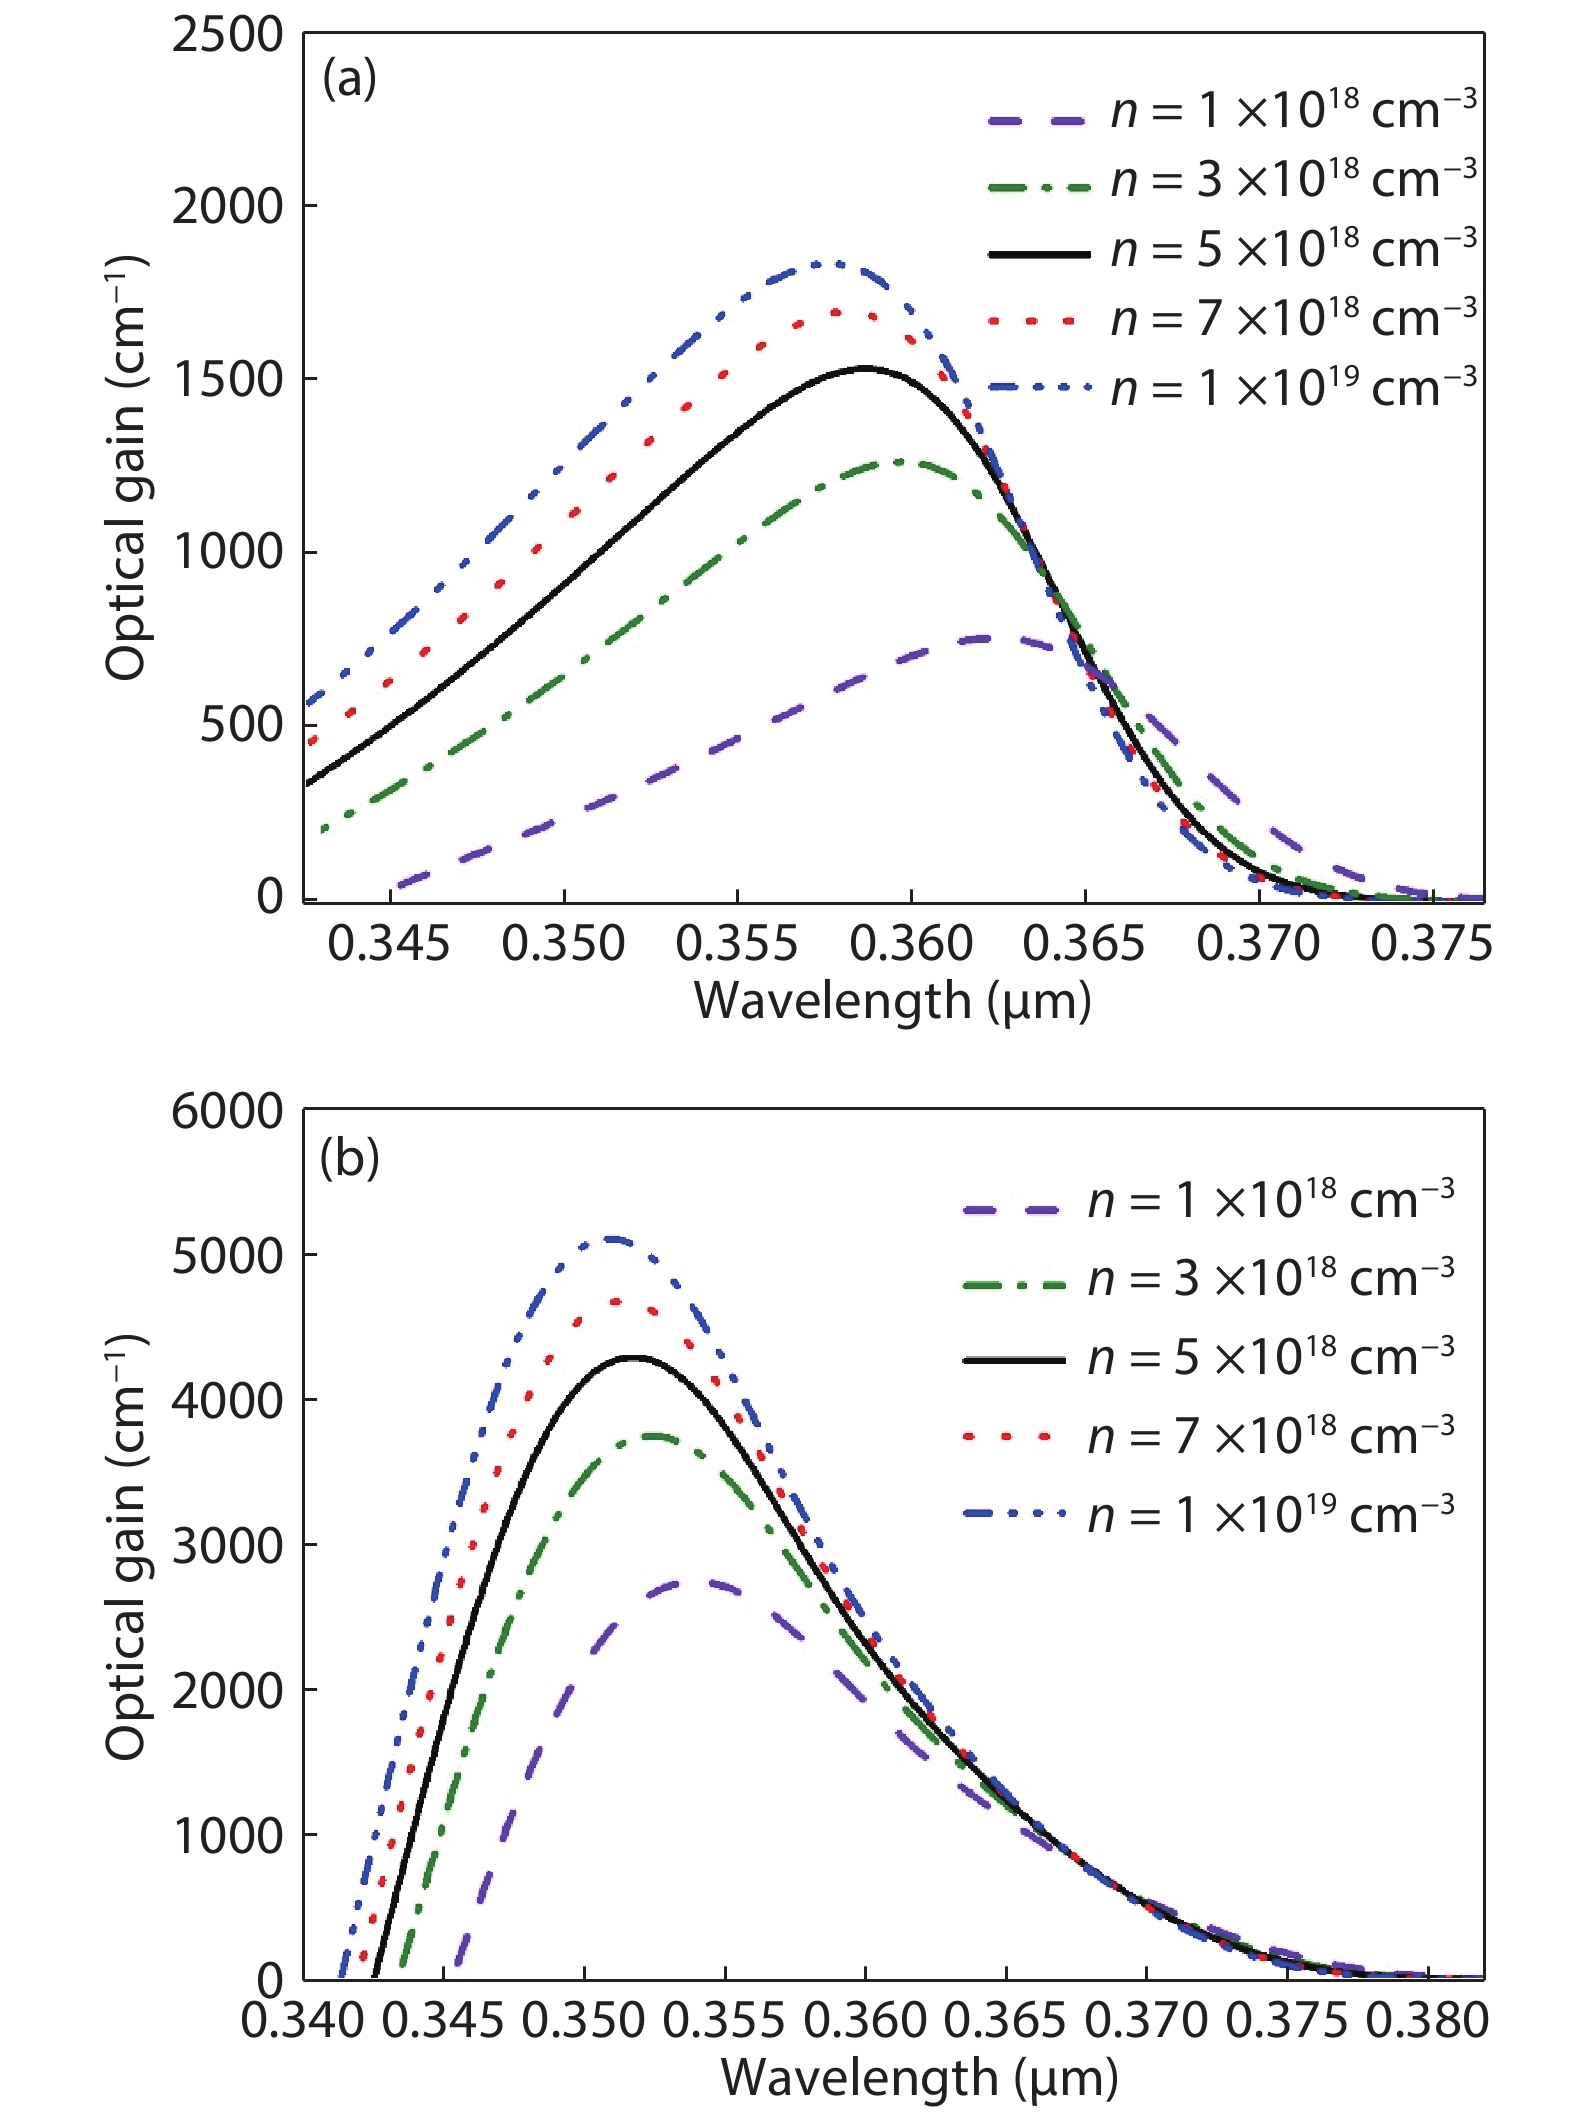 (Color online) Optical gain spectrum in an Al0.1Ga0.9N/GaN/Al0.1Ga0.9N QW laser as a function of the wavelength for different carrier densities in the active region at T = 300 K. (a) Band-to-band model. (b) 6-band k.p model.